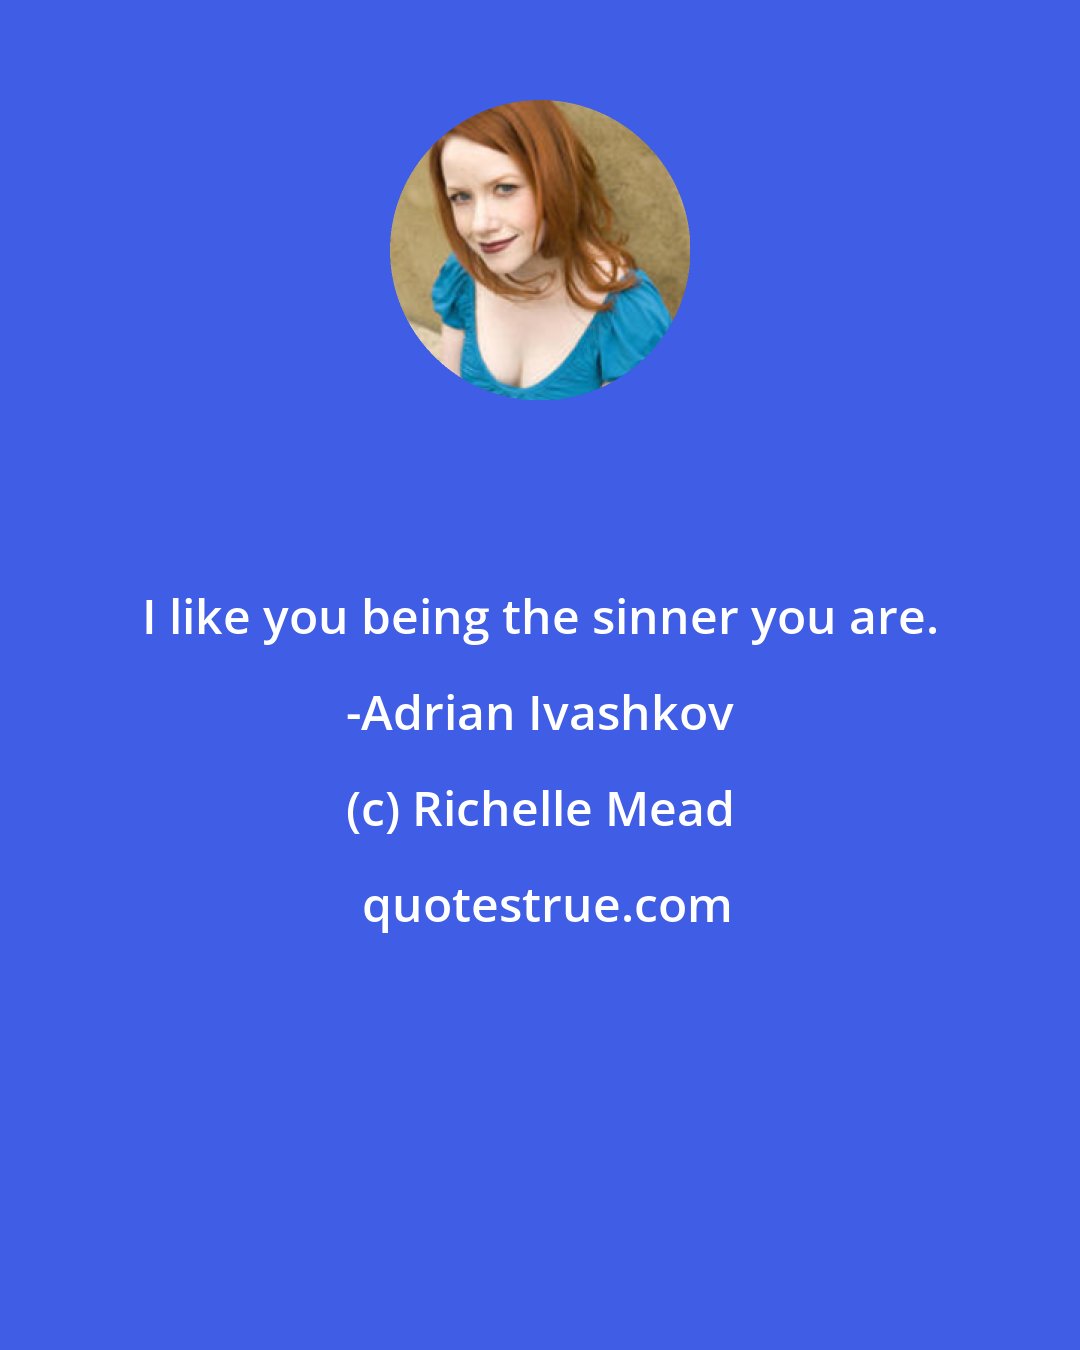 Richelle Mead: I like you being the sinner you are. -Adrian Ivashkov